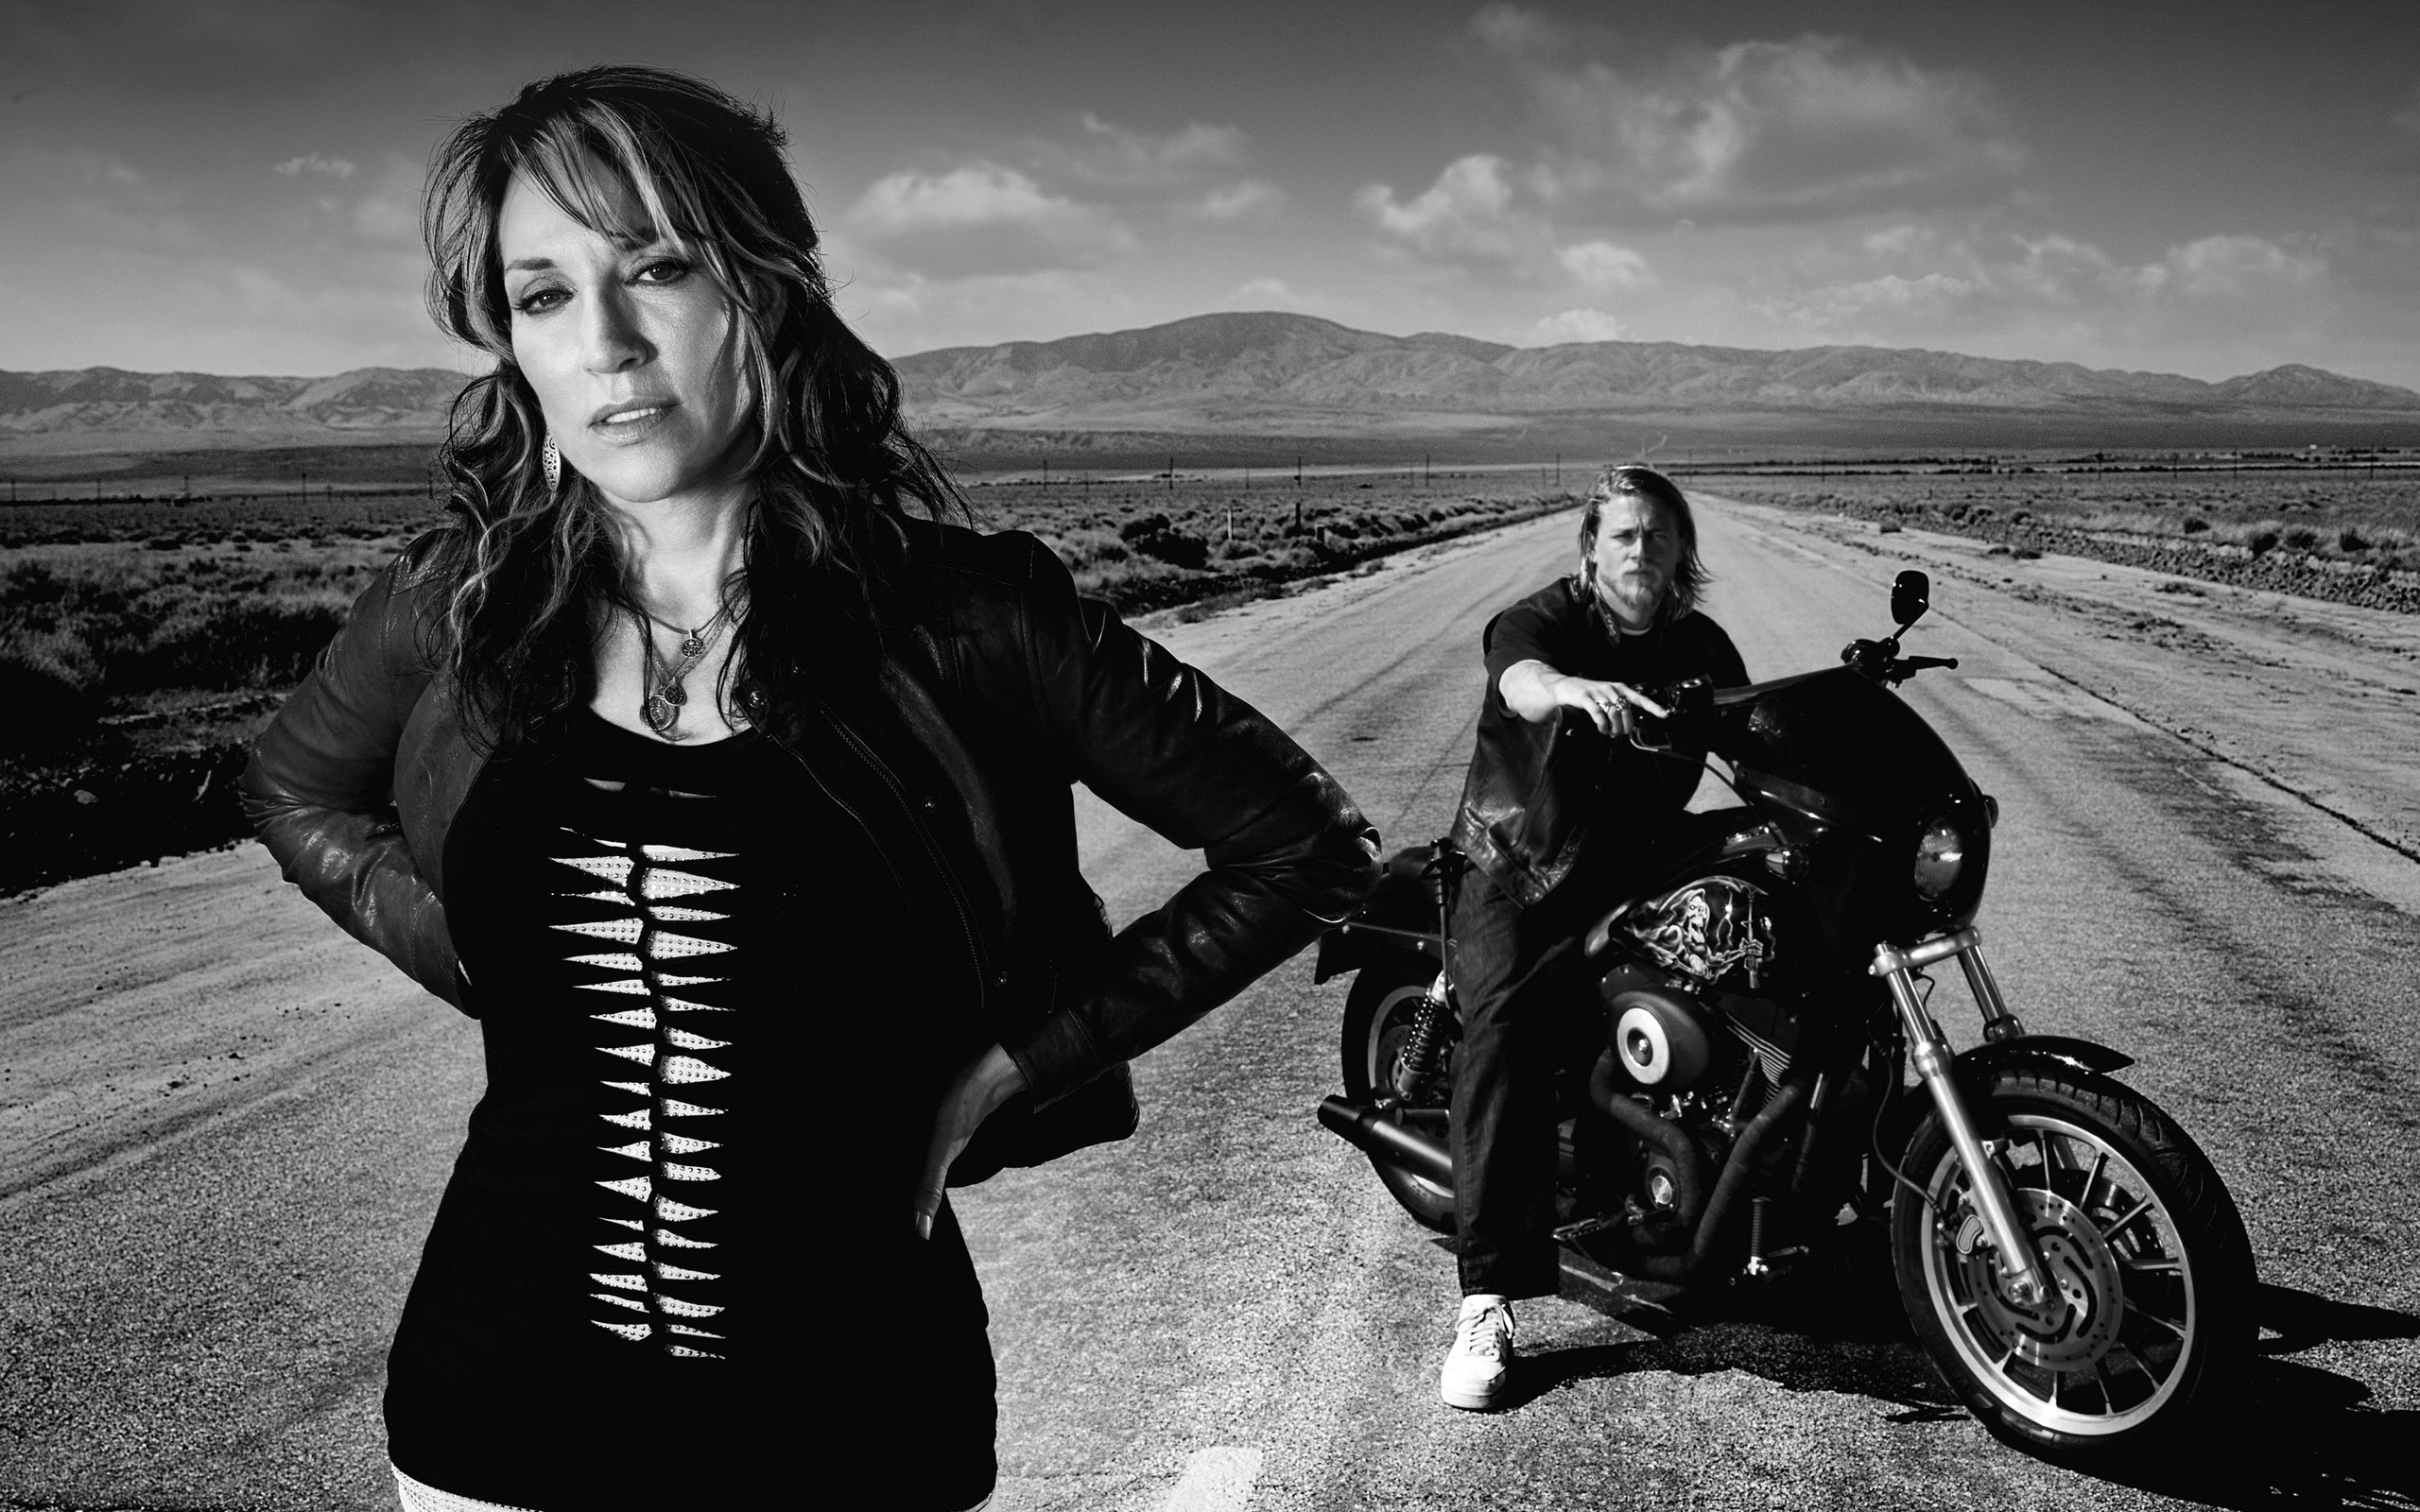 Sons of Anarchy. 